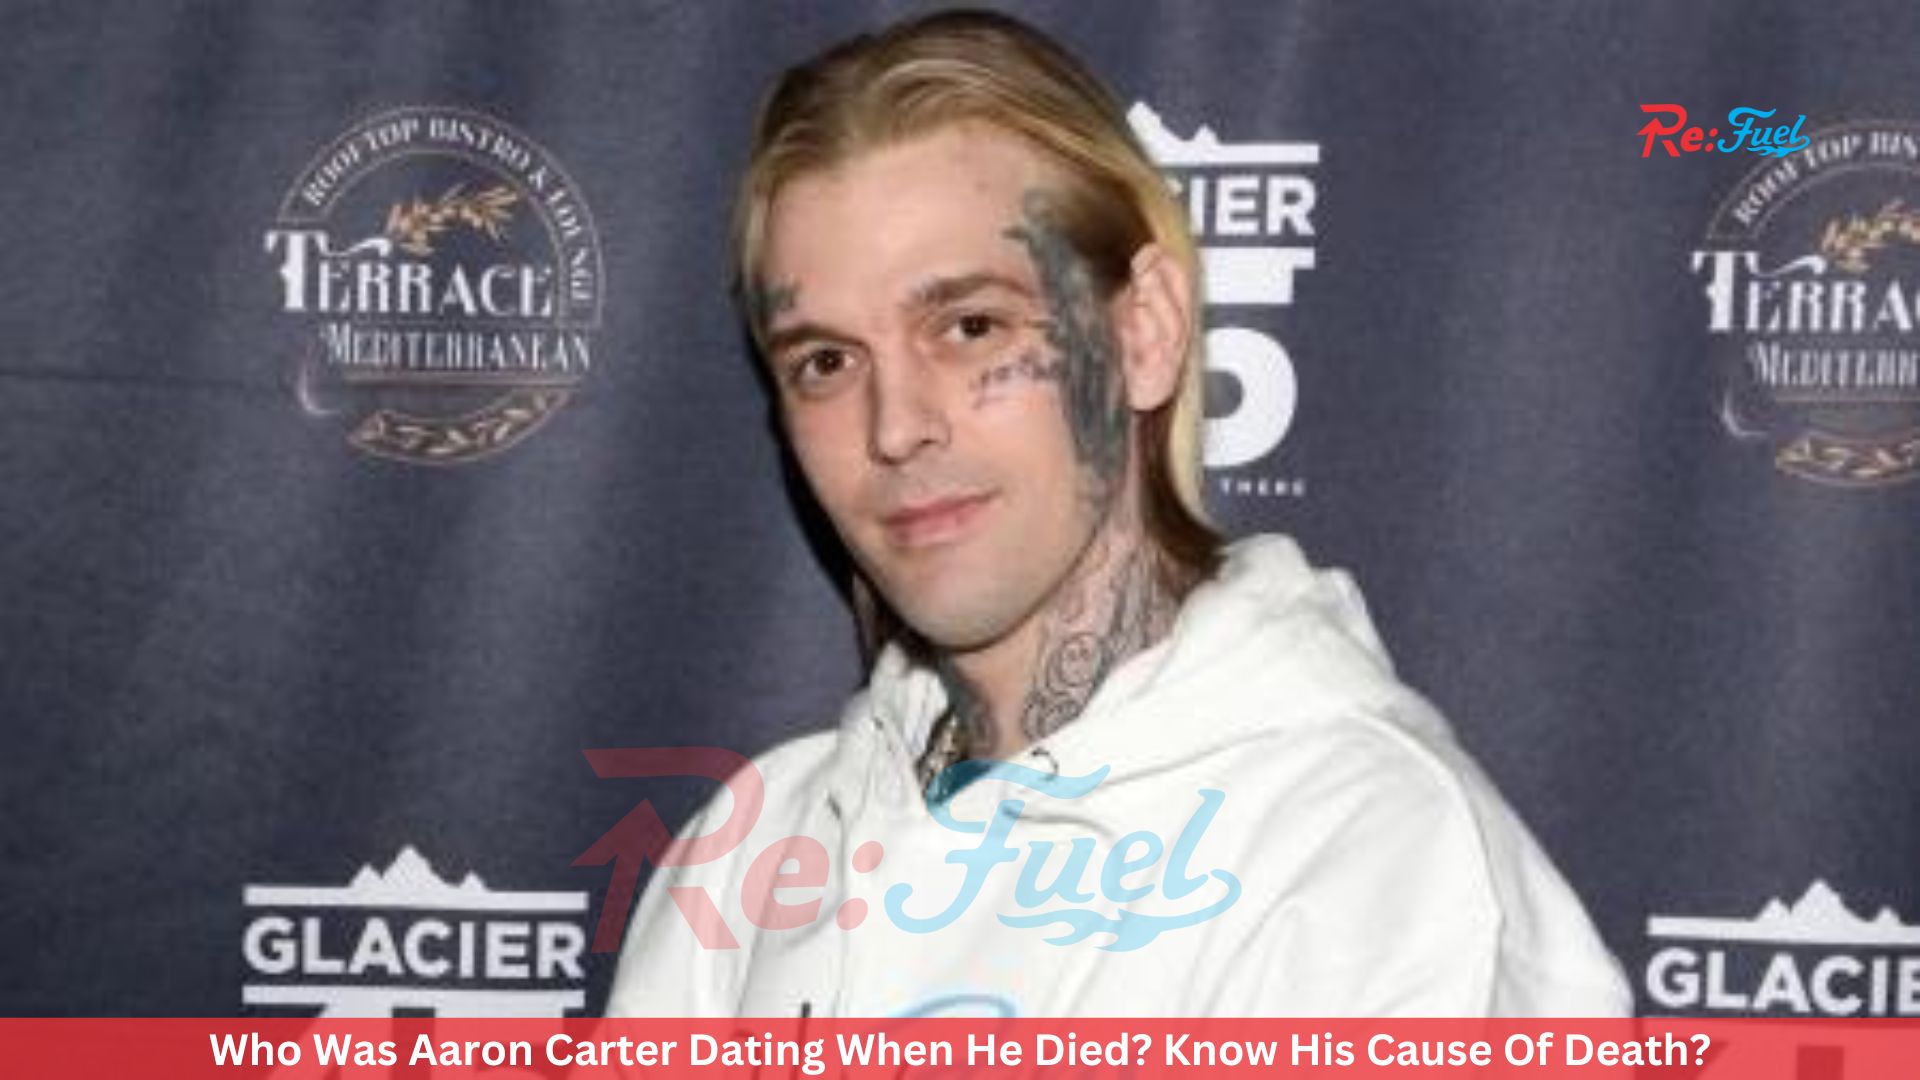 Who Was Aaron Carter Dating When He Died? Know His Cause Of Death?